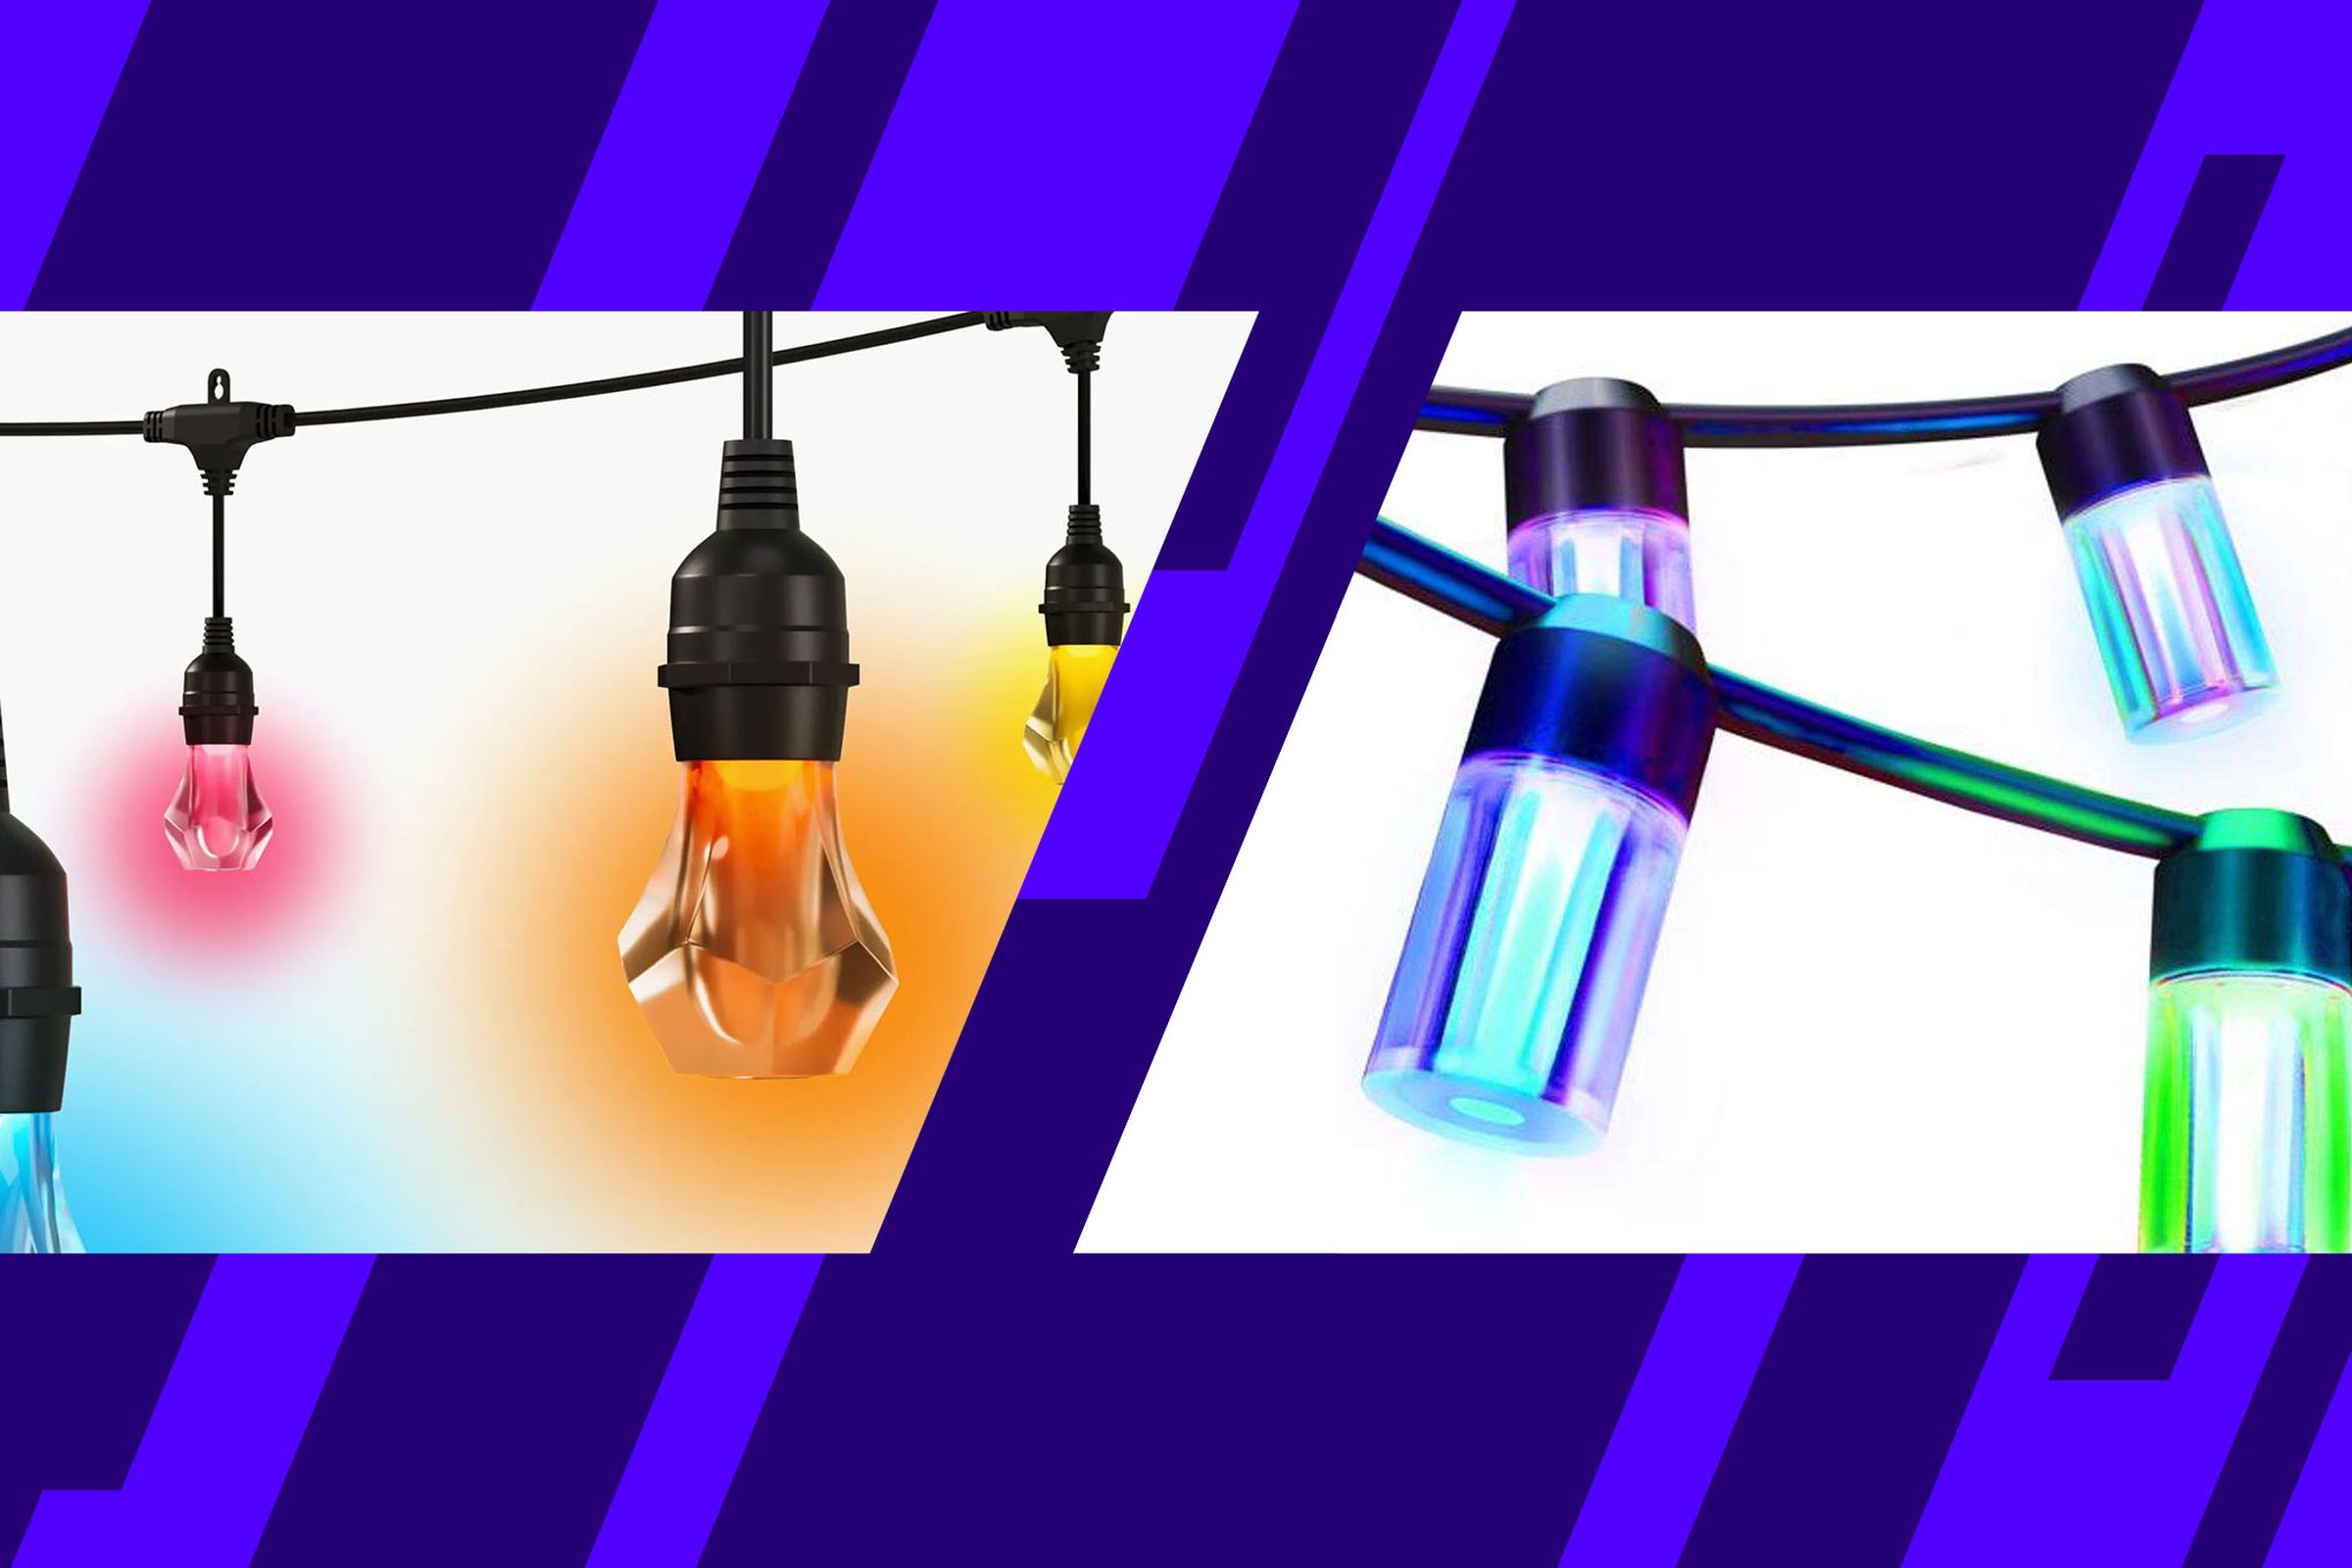 Photo collage showing two different brands of string lights.